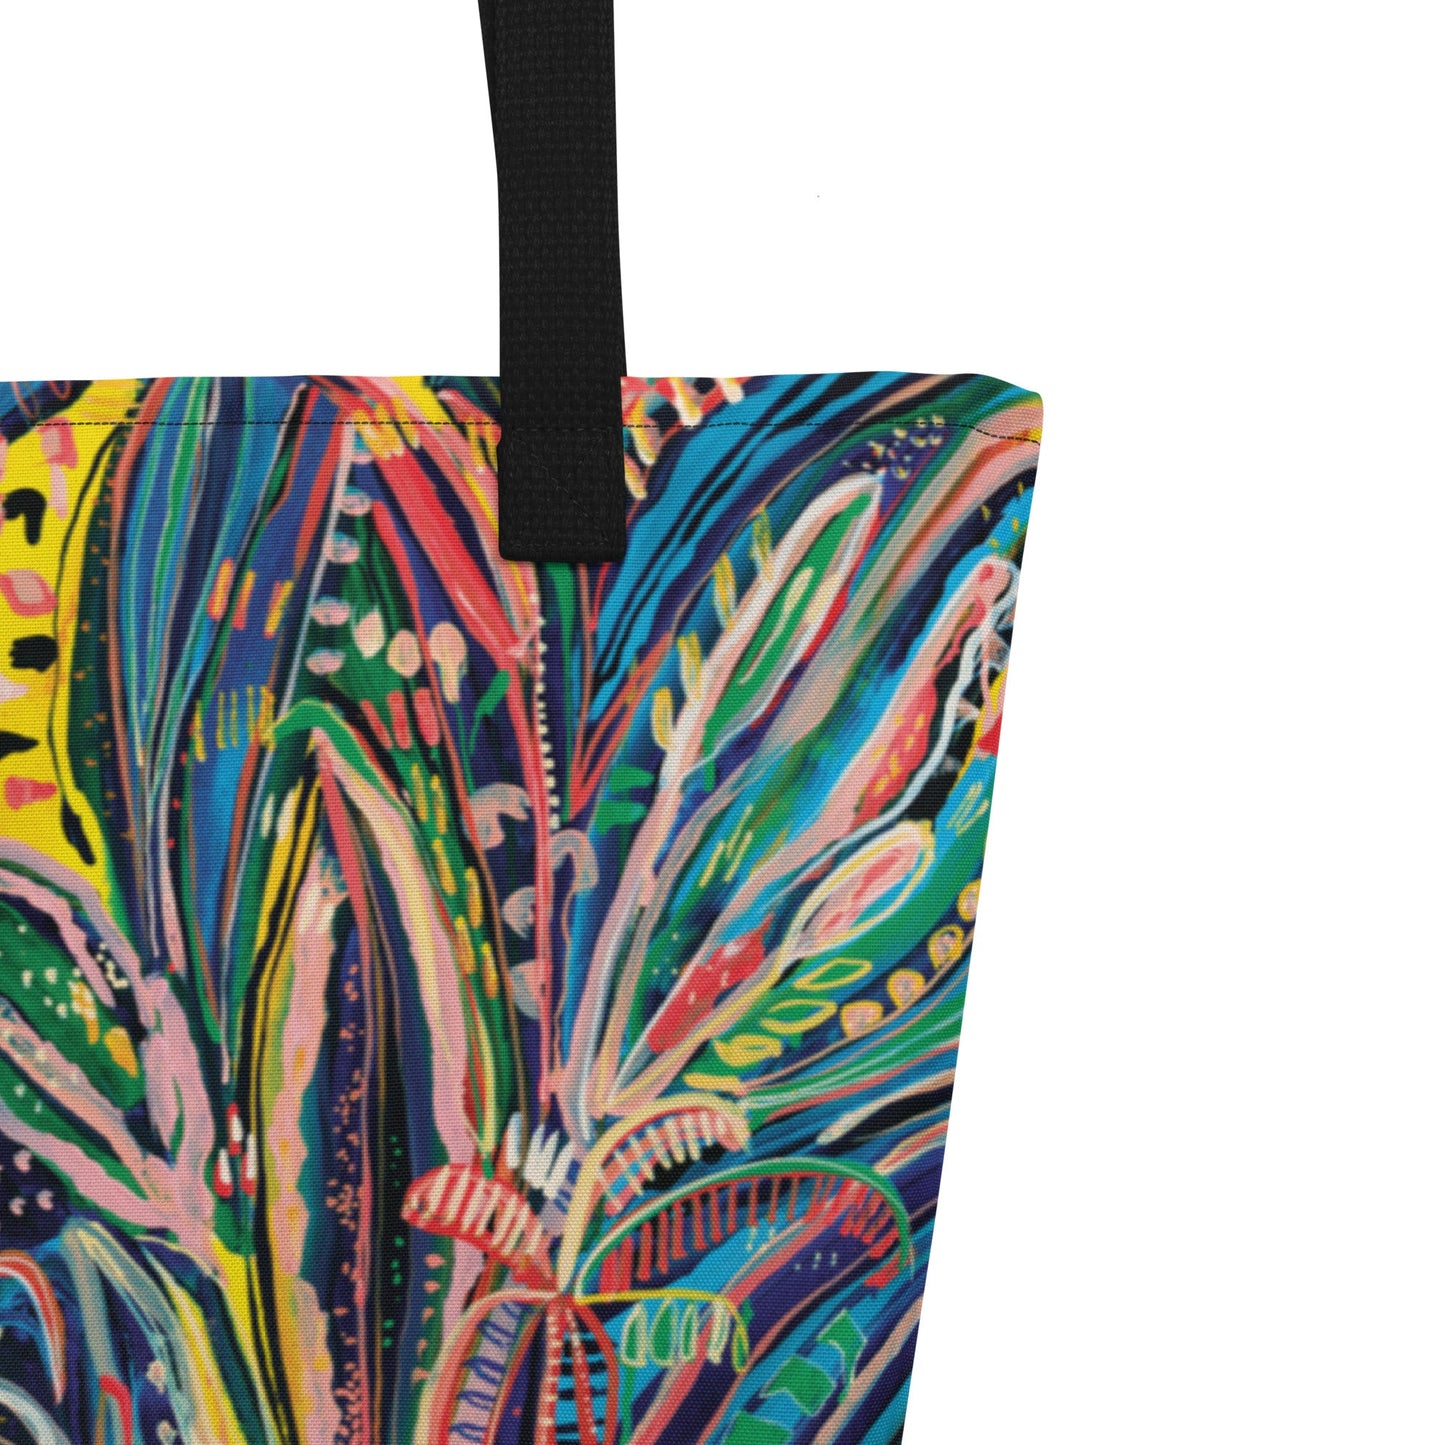 Club Tropicana Large Tote Bag with pocket - Milpali